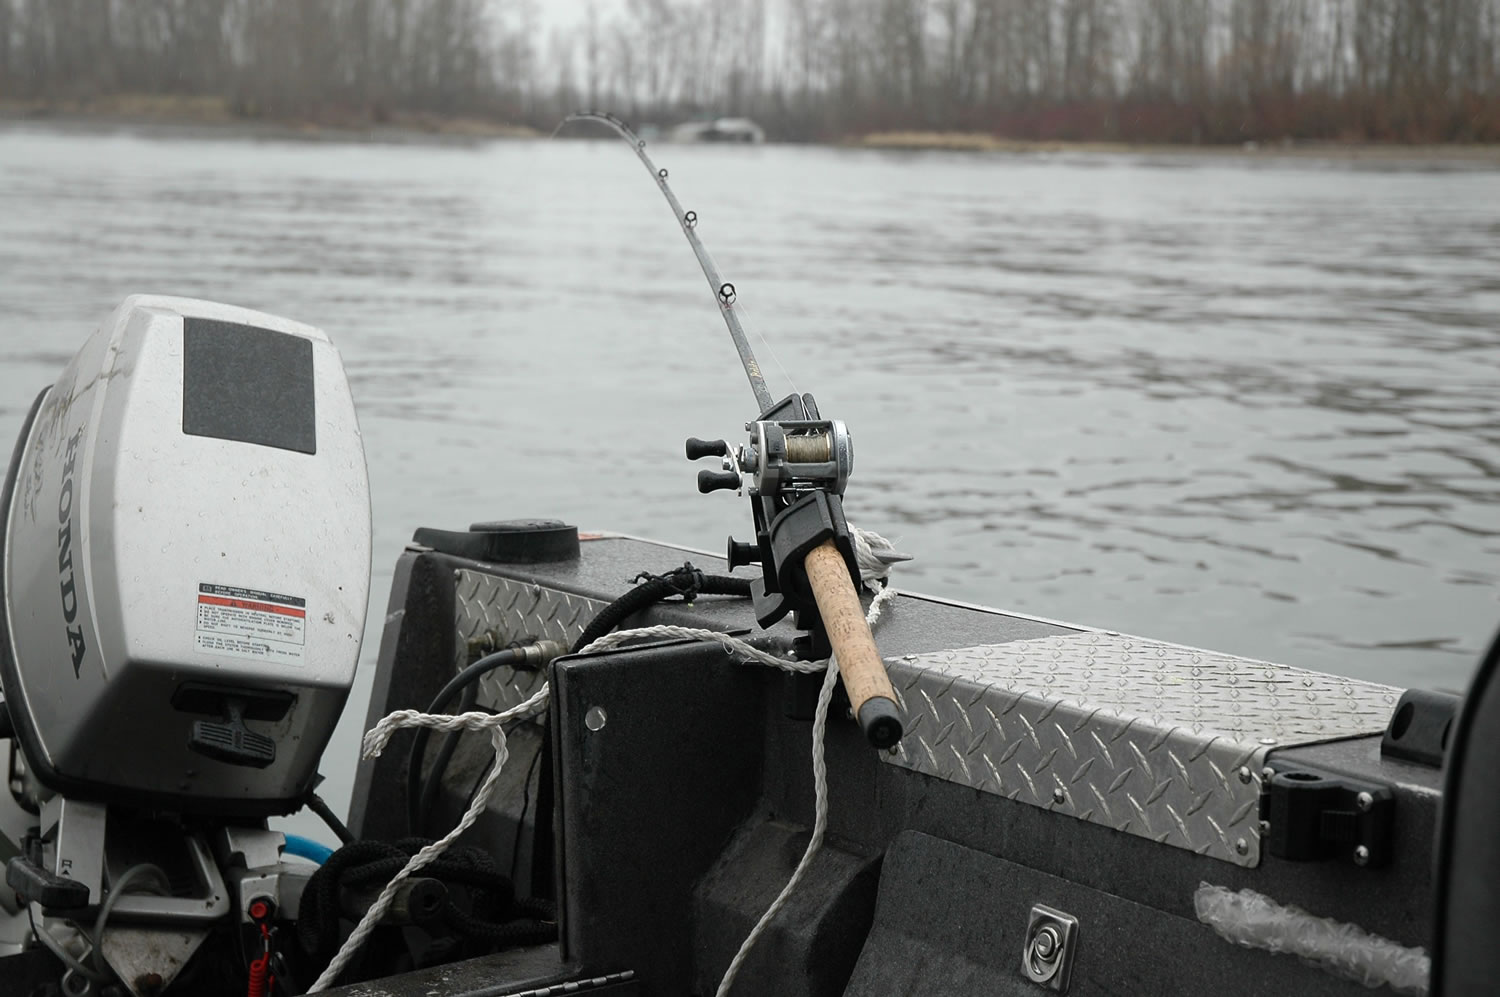 Spring chinook fishing in 2017 has been all about waiting for flood conditions to subside in the Columbia River.